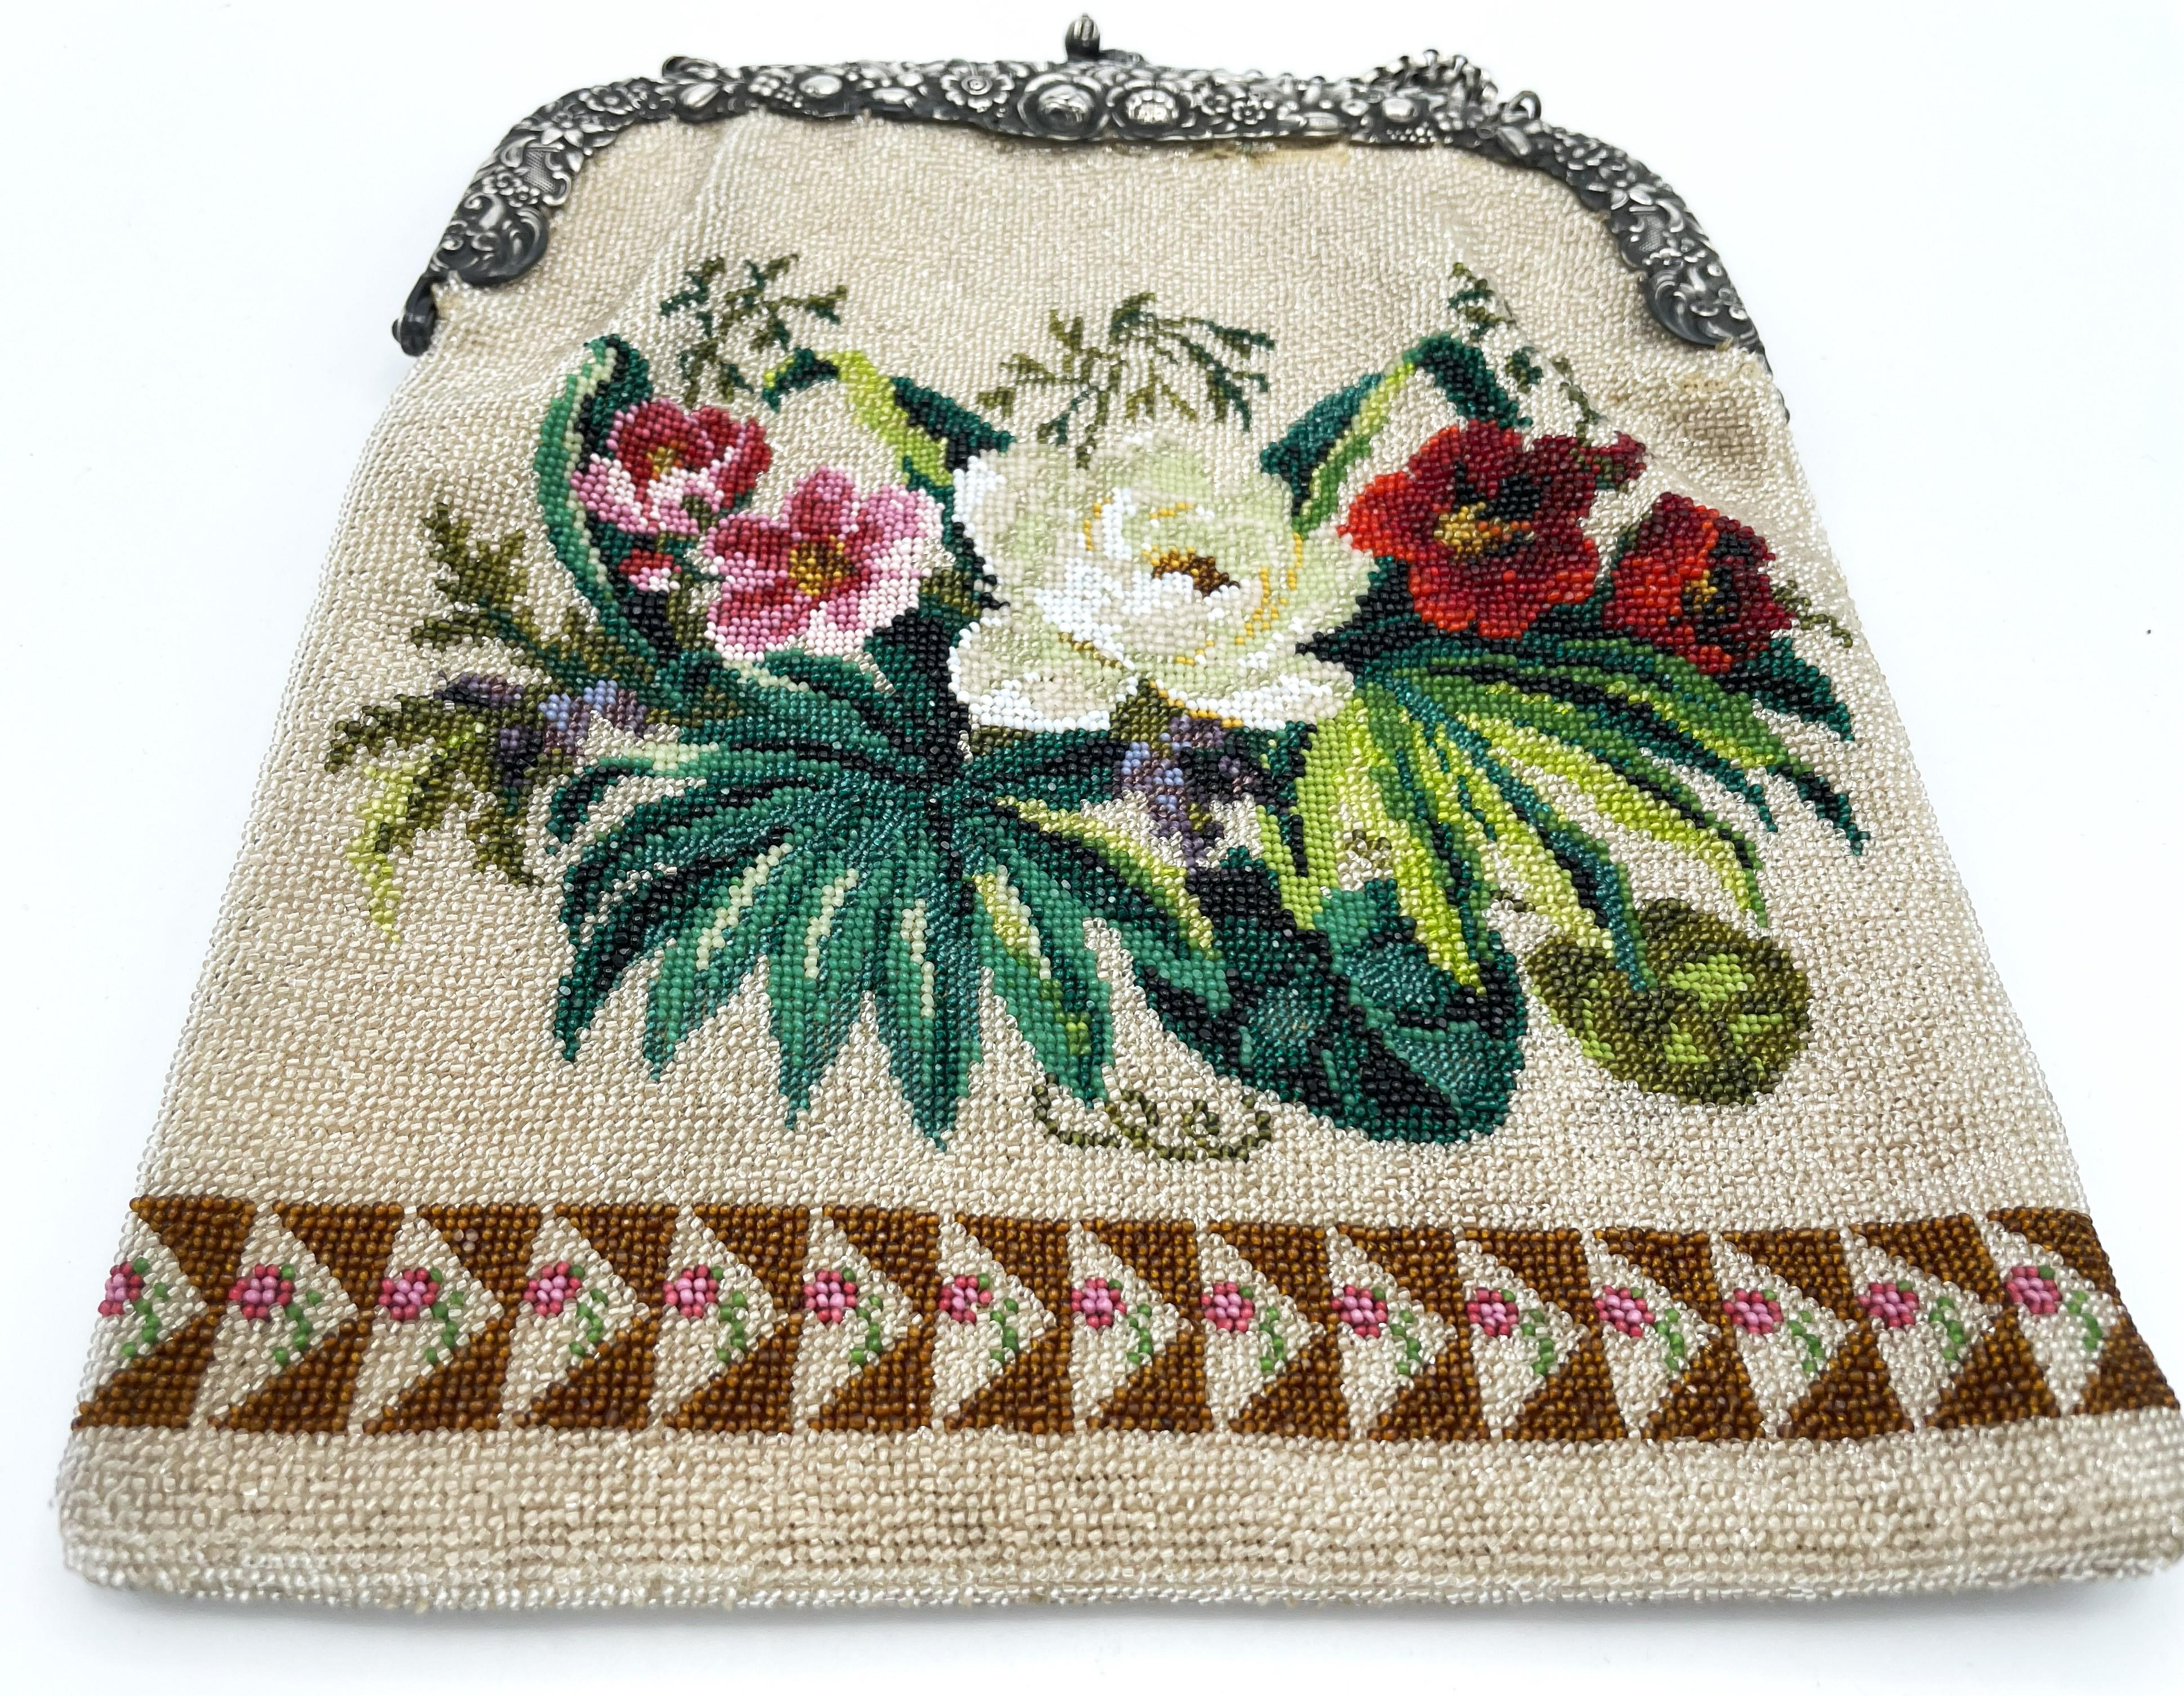 Antique hand-knitted beaded bag with hallmarked silver hanger + chain from 1850s For Sale 4